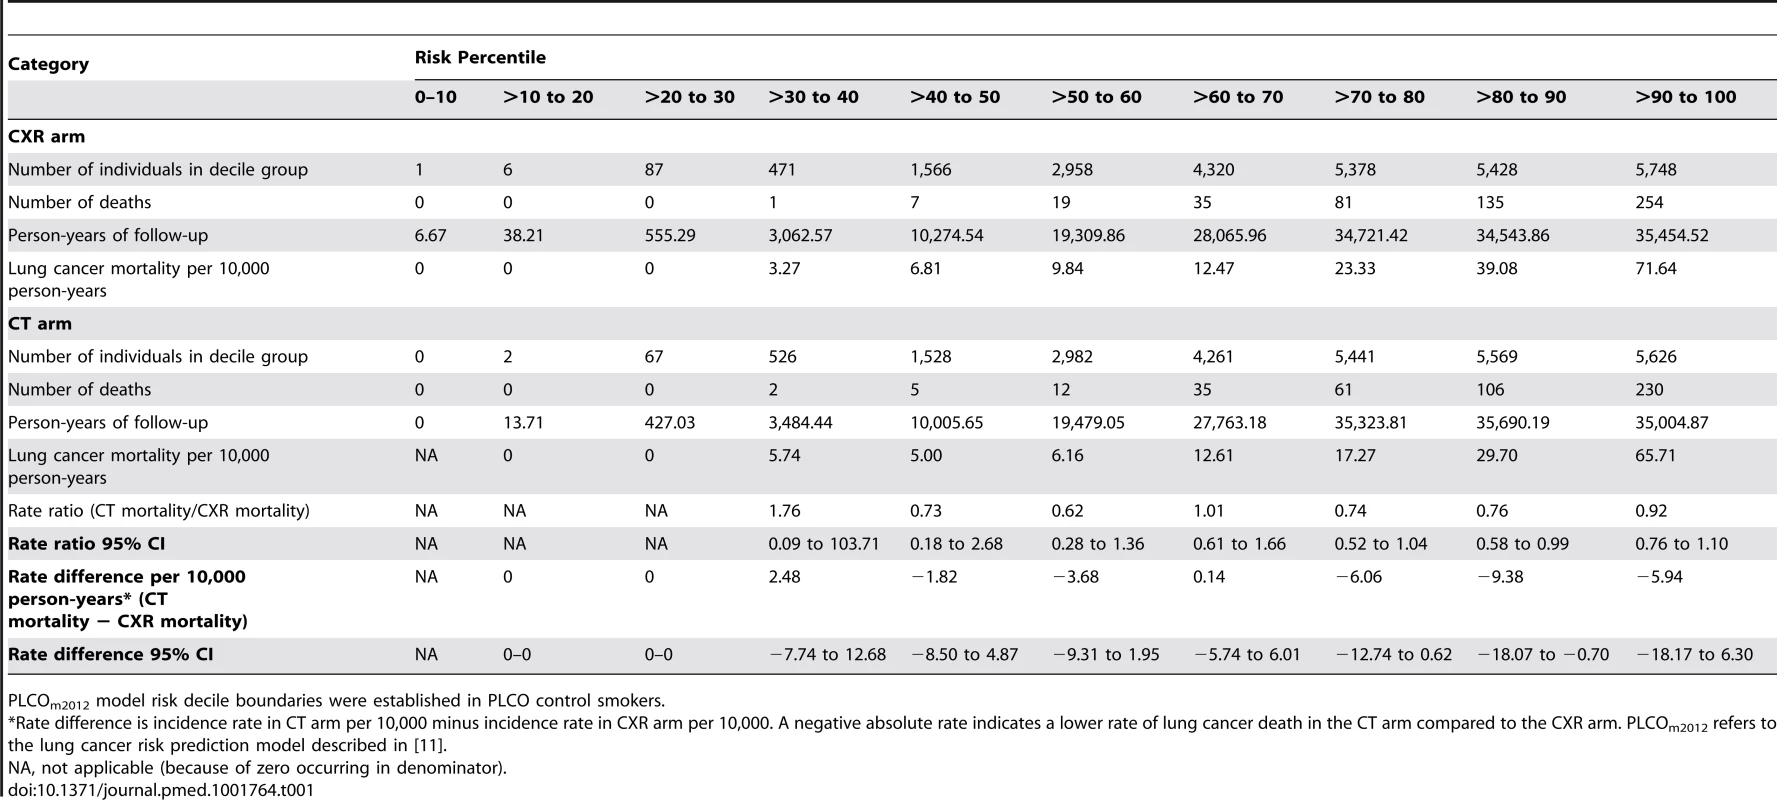 Mortality rates, rate ratios, and rate differences in NLST participants by trial arm and by decile of PLCO<sub>m2012</sub> risk.